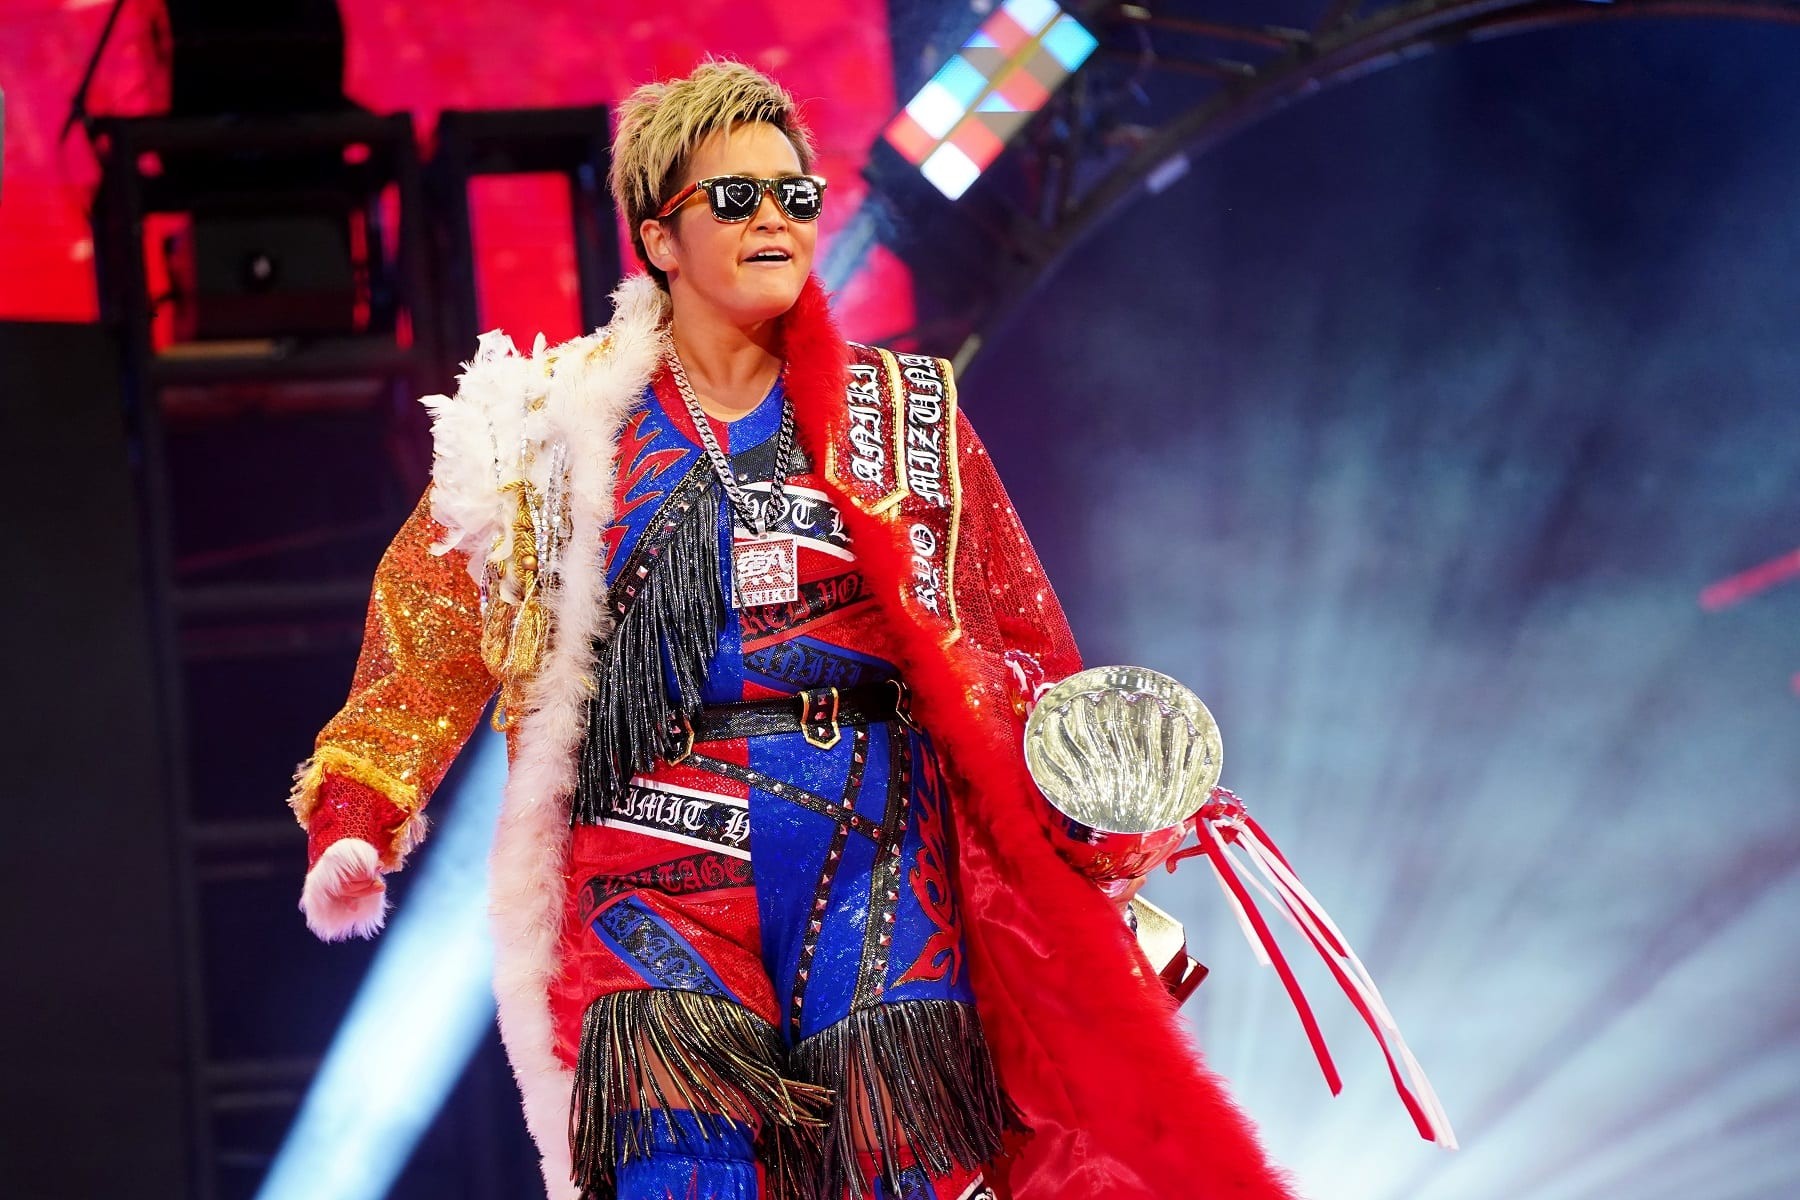 Ryo Mizunami Discusses Her AEW Appearances, Wanting To Work In The UK & More